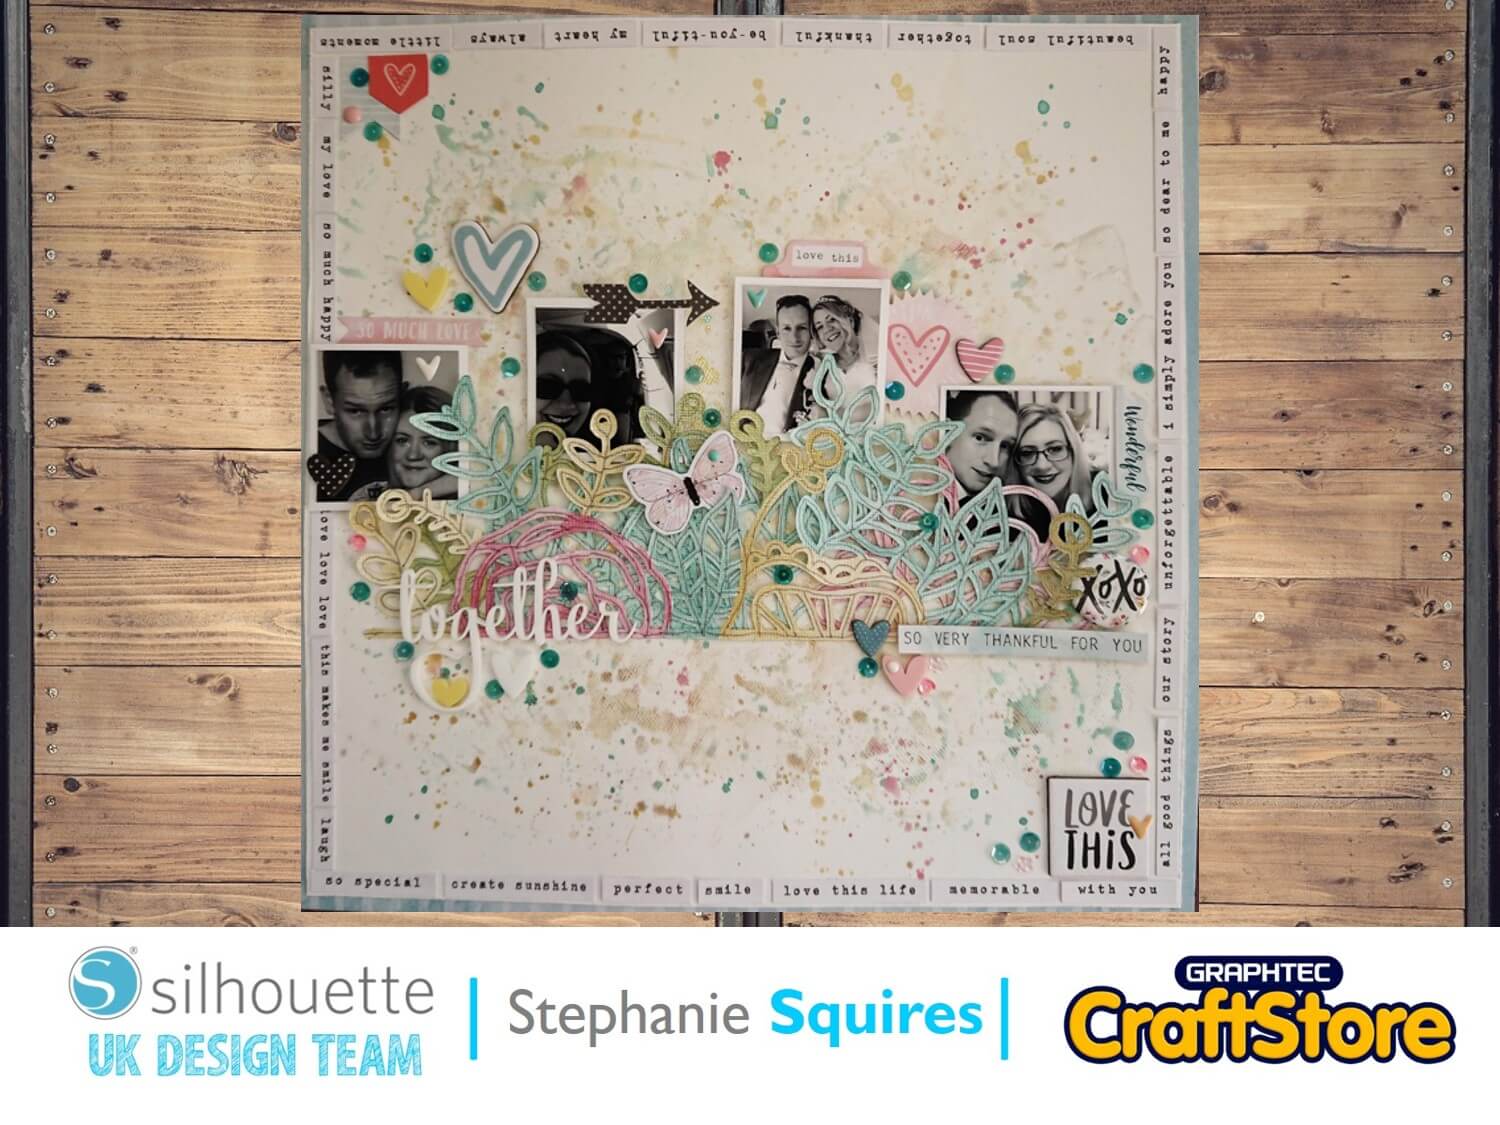 silhouette uk blog - stephanie squires - scrapbooking with steph - together - main